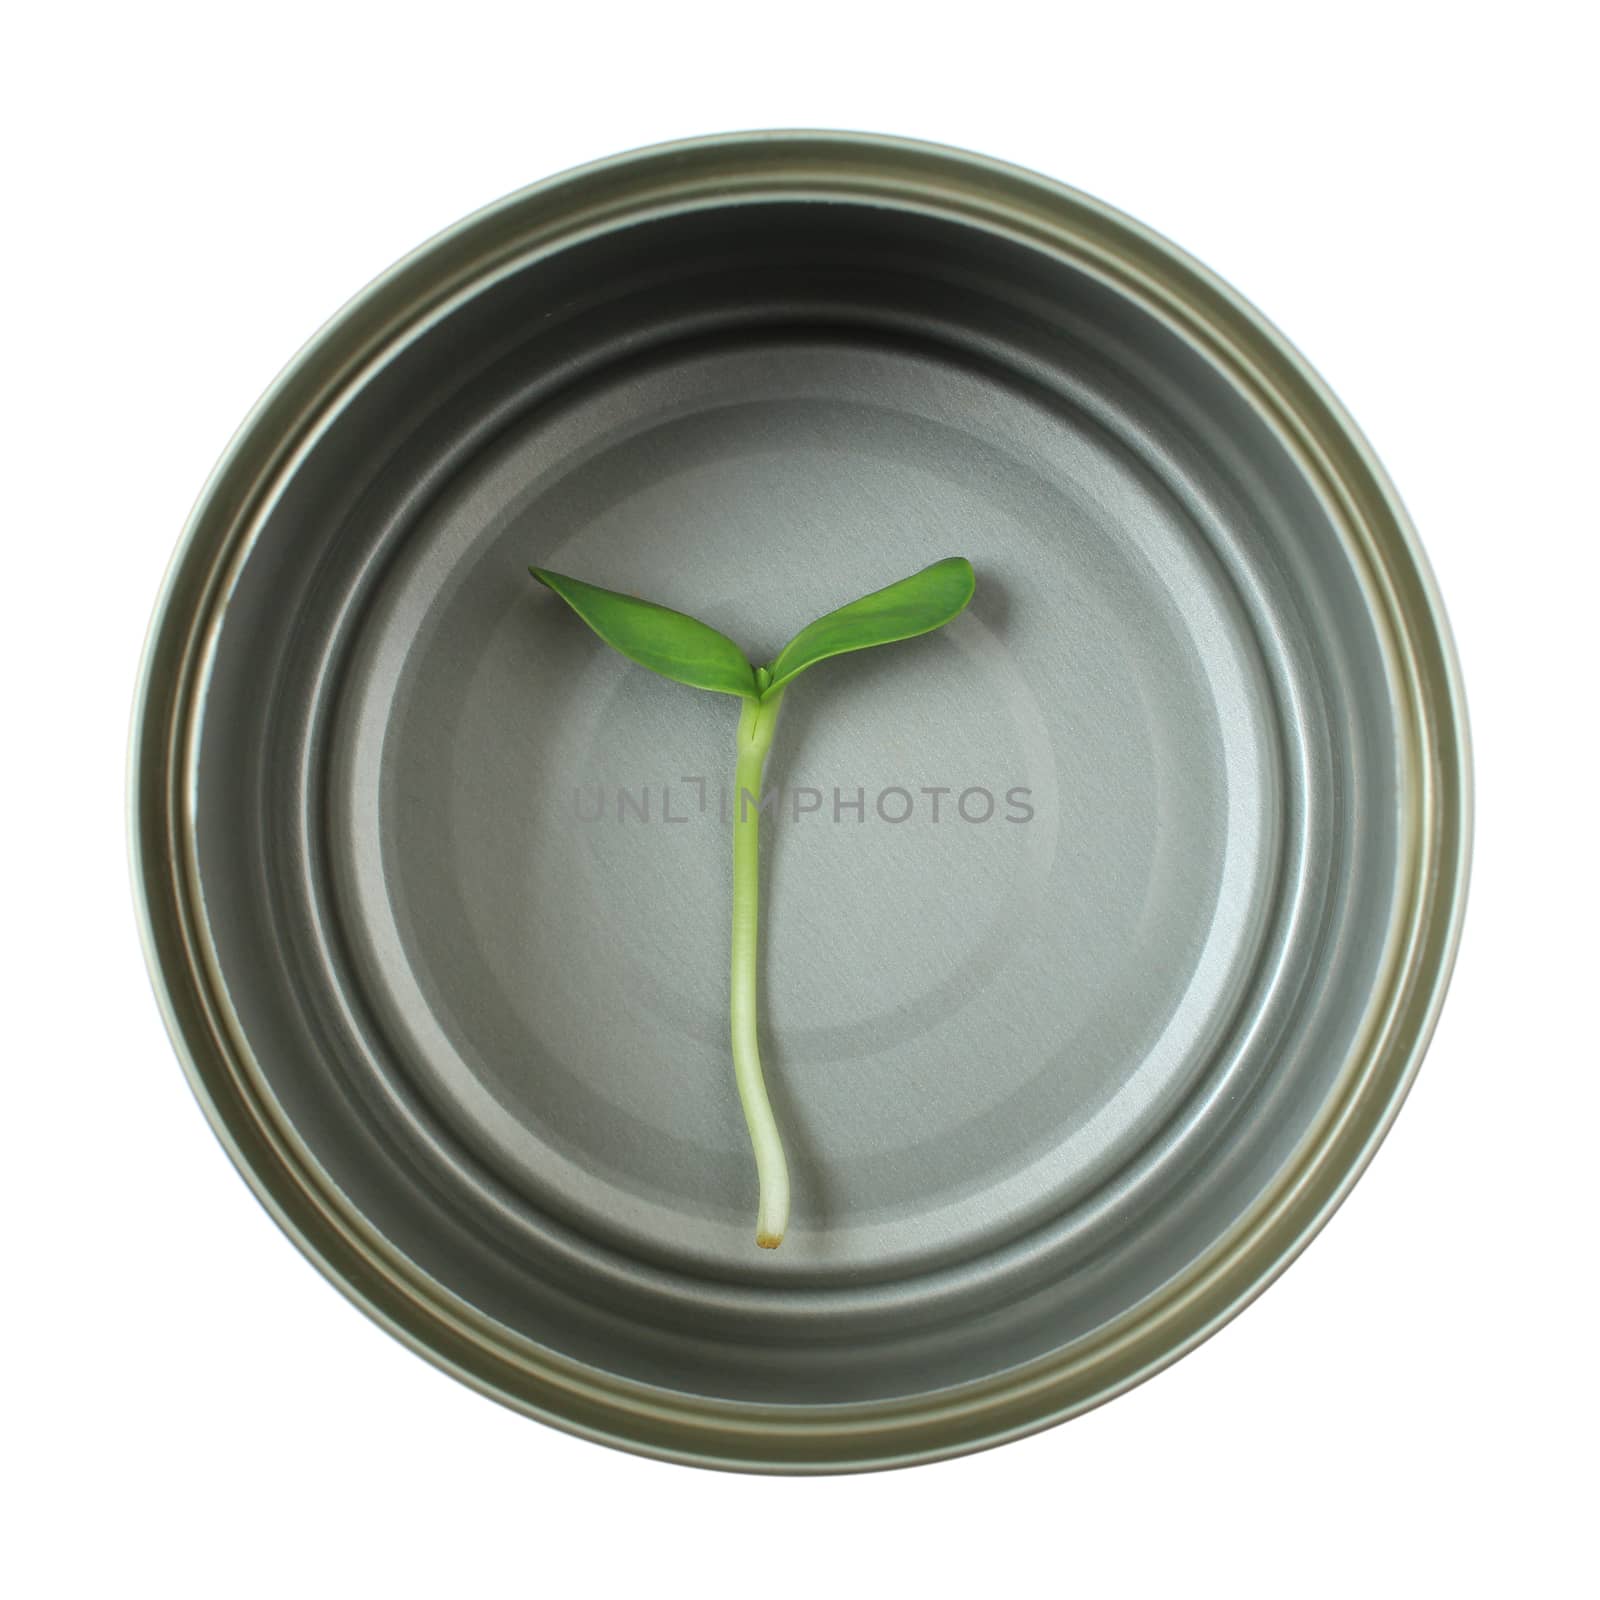 Organic green young sunflower sprout in cans